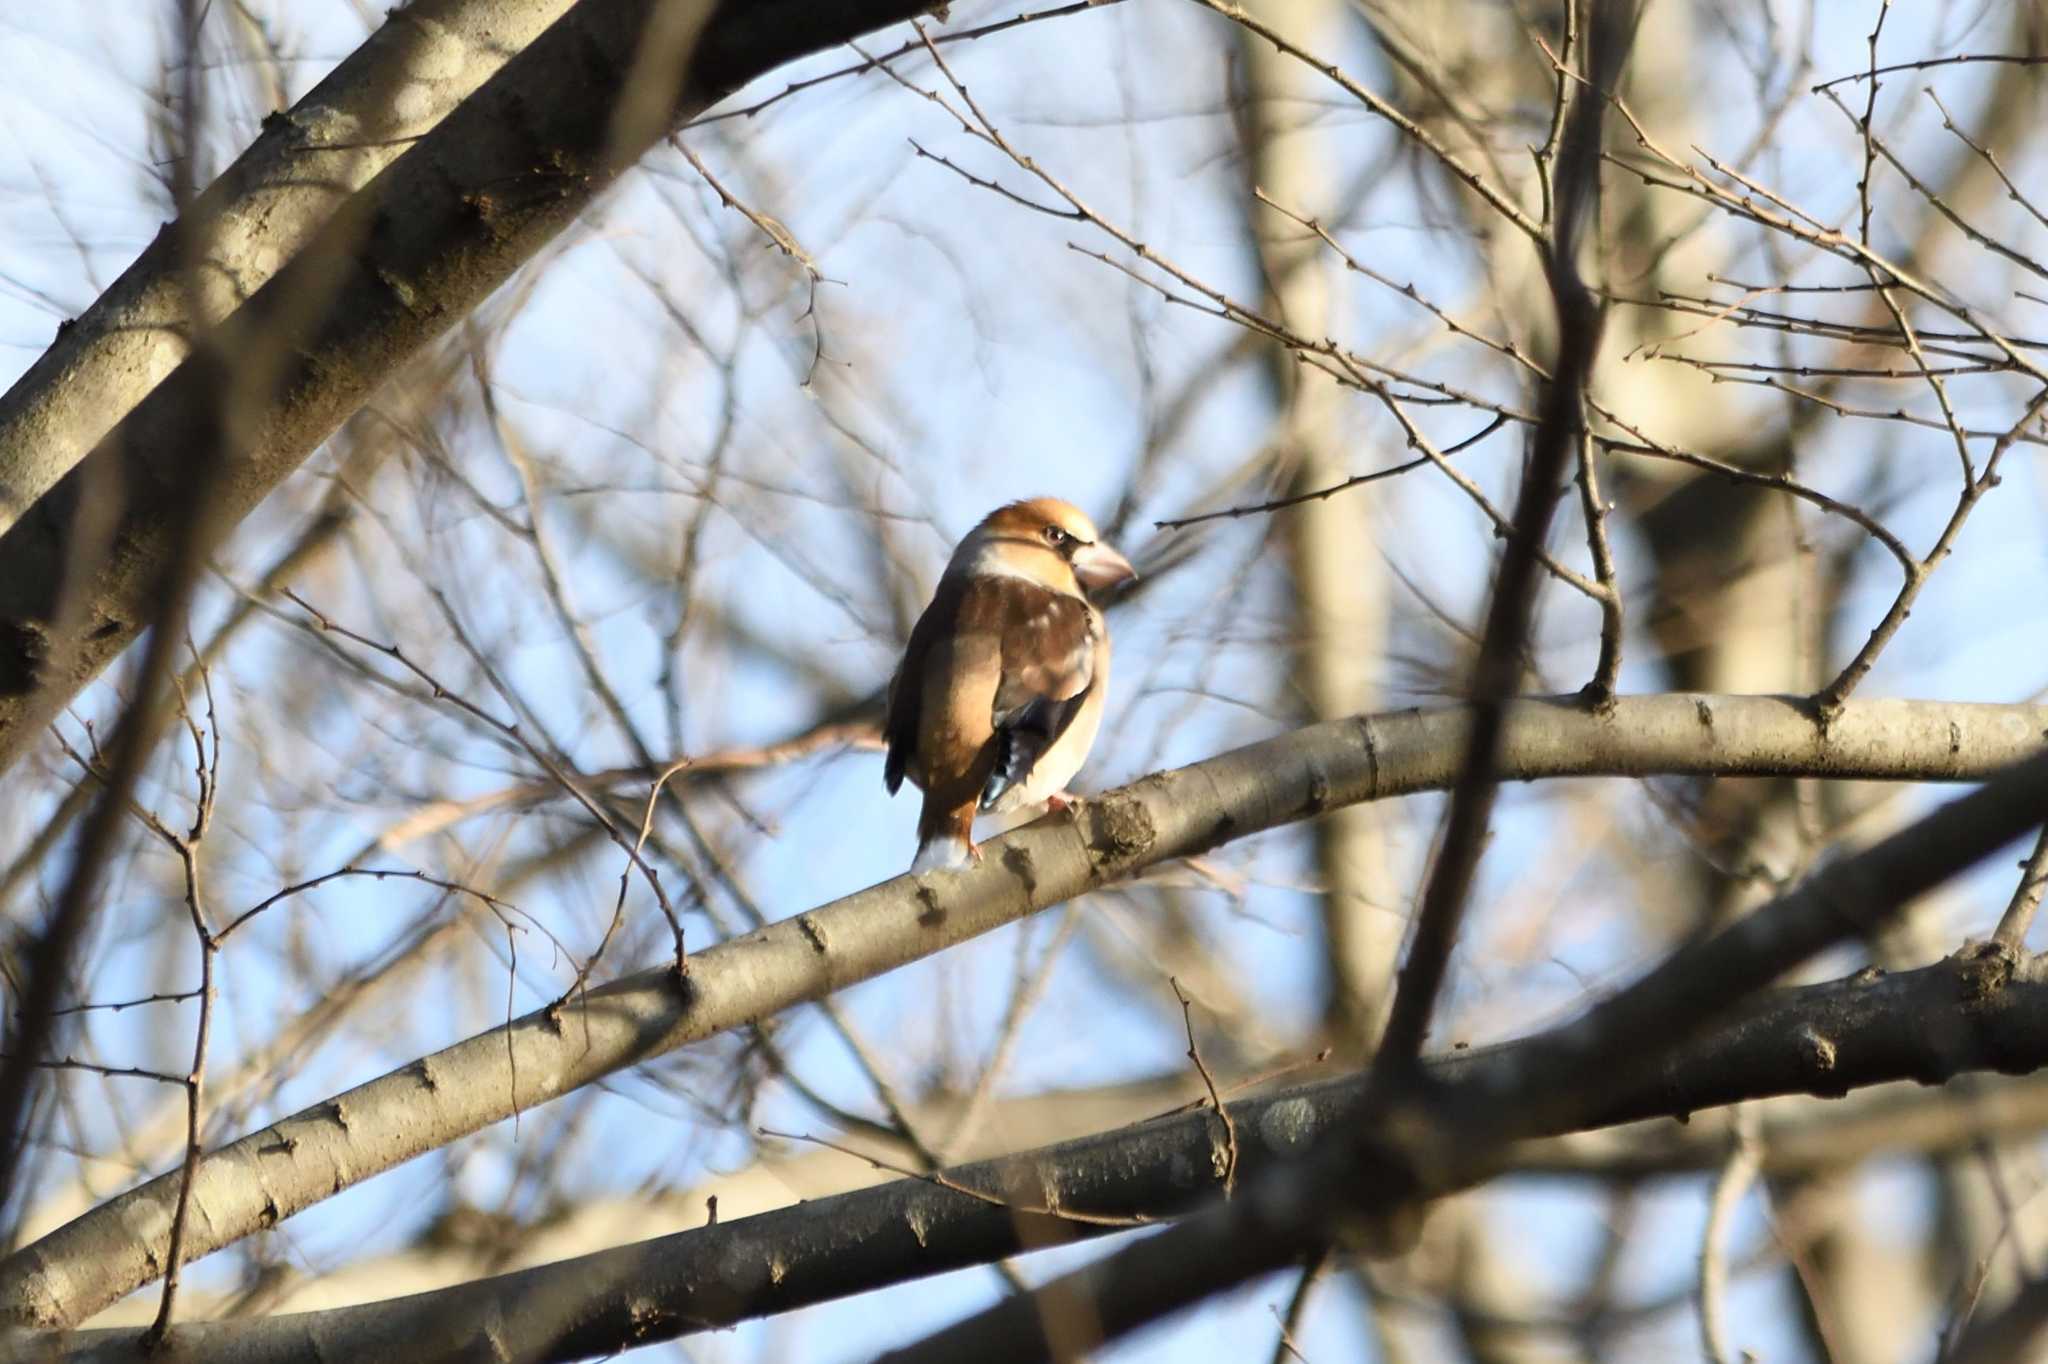 Photo of Hawfinch at みずほの自然の森公園 by すずめのお宿